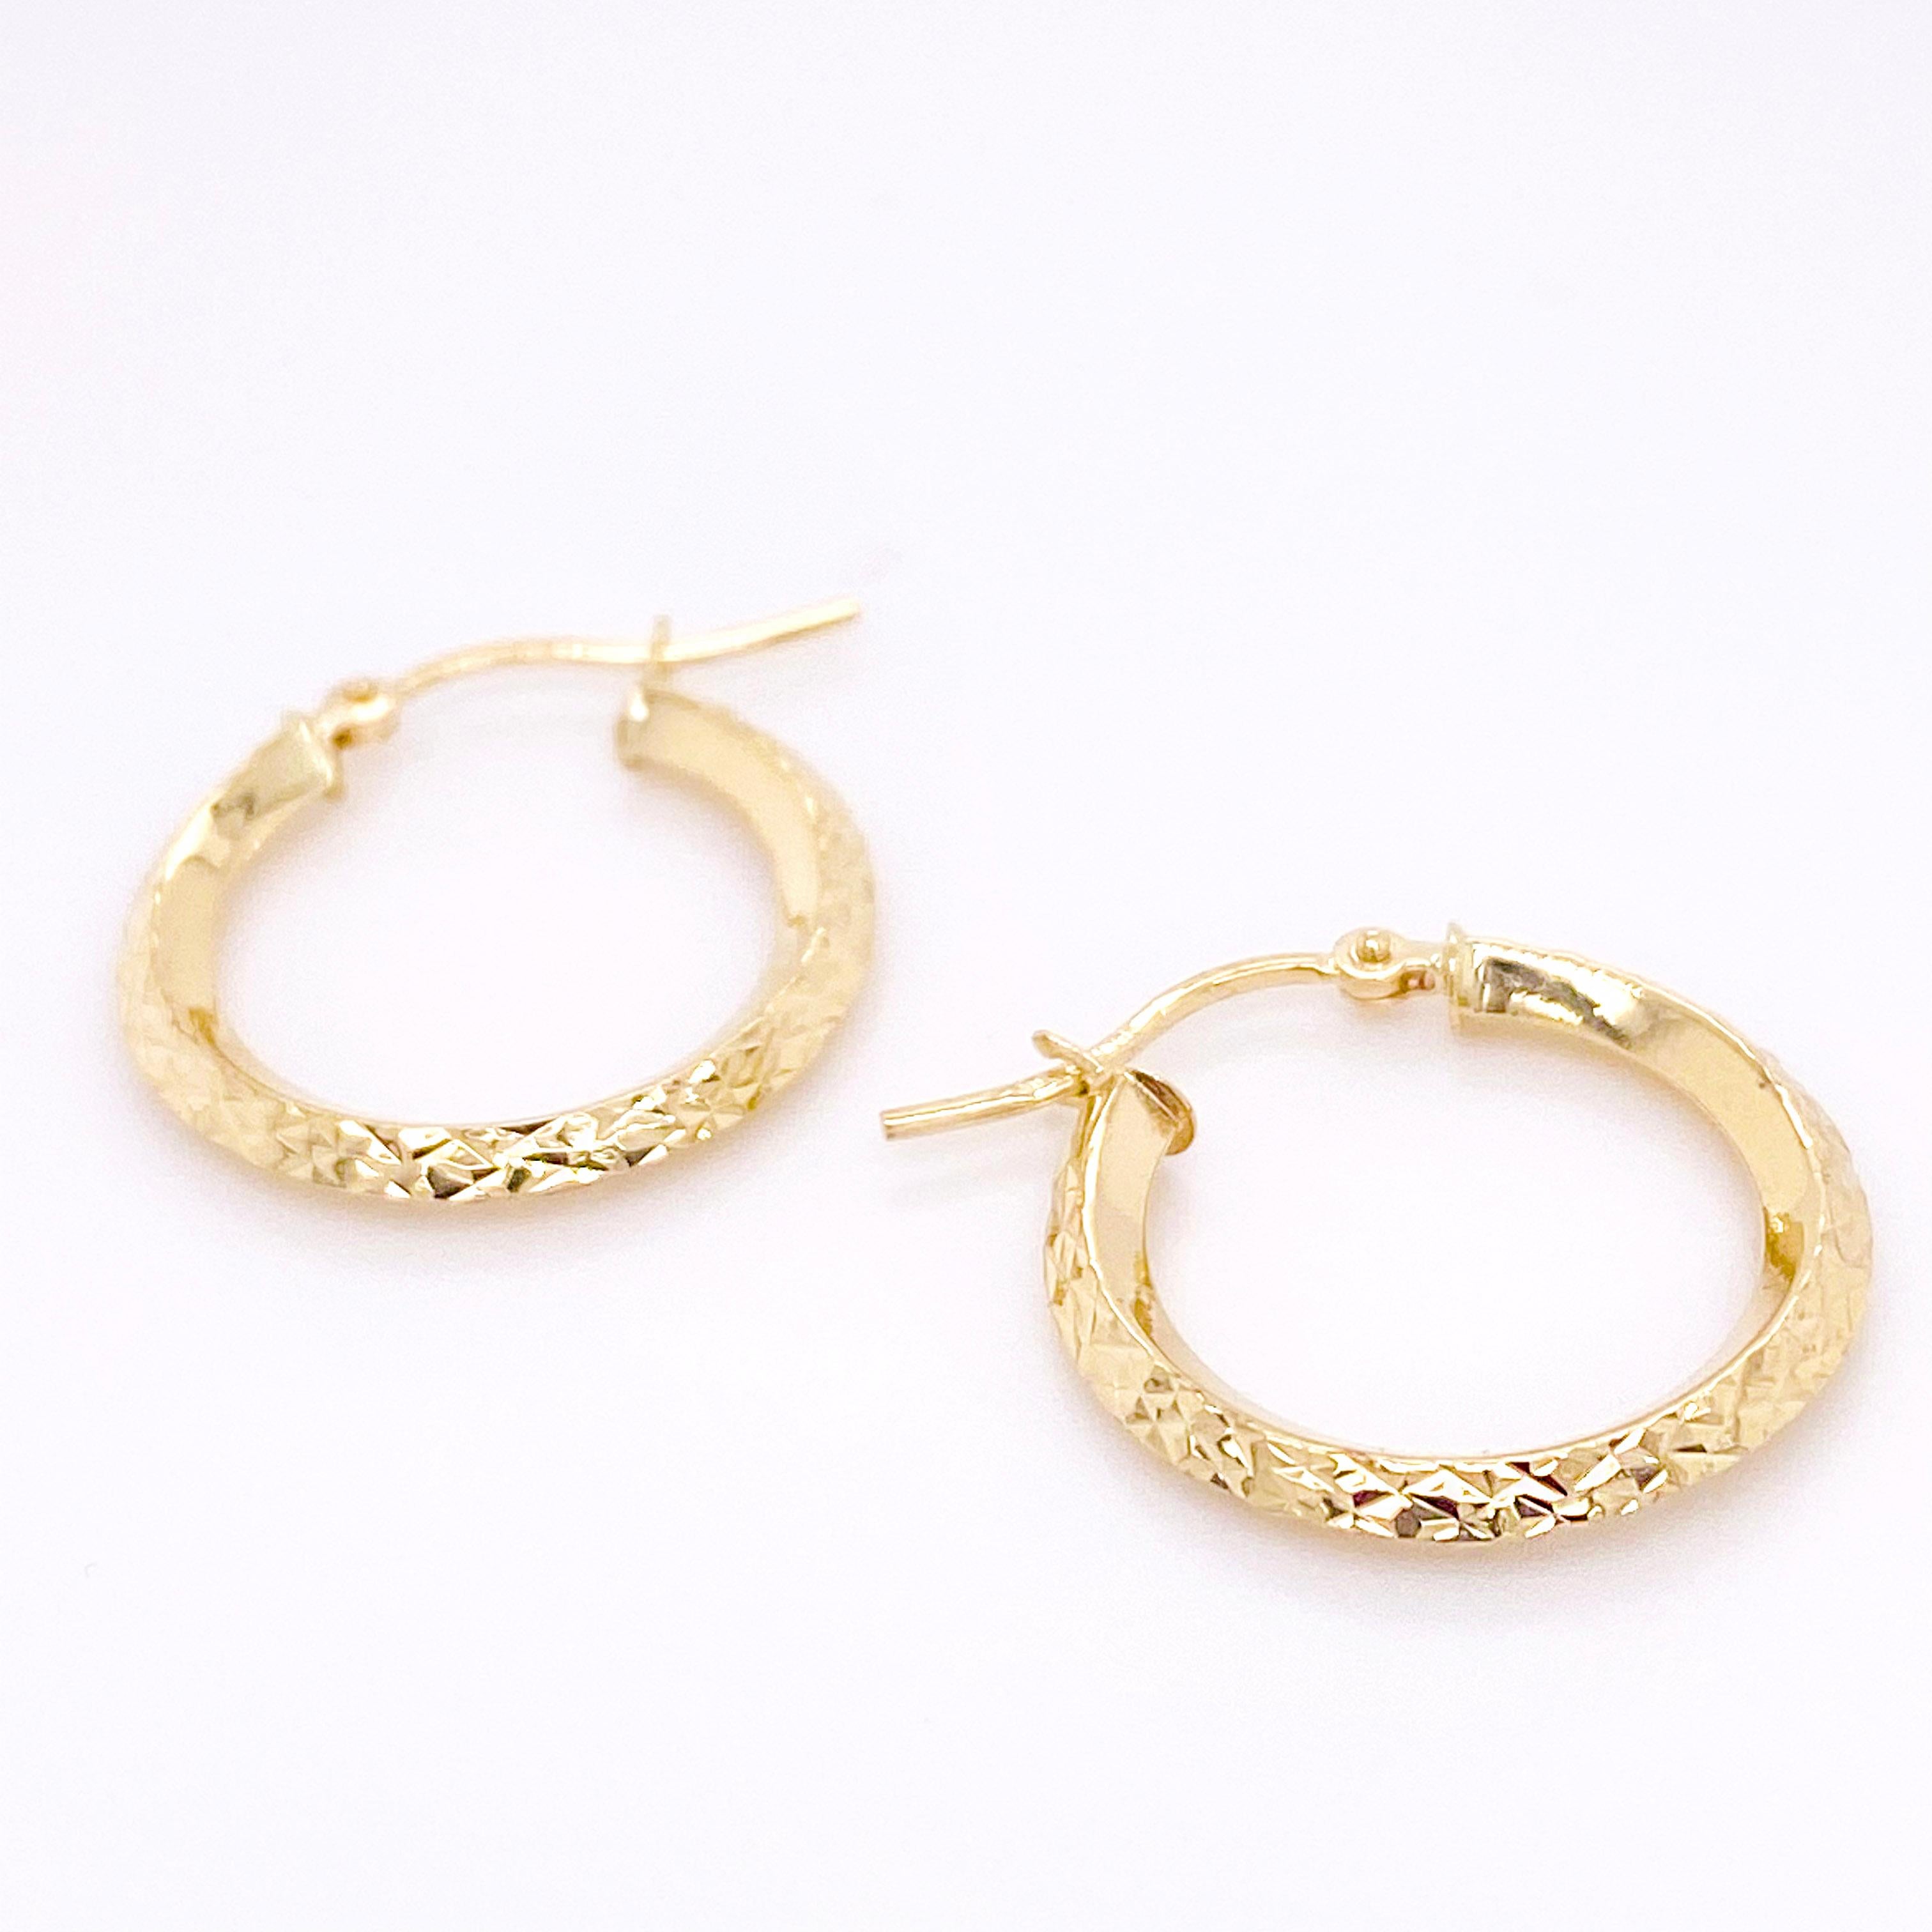 The diamond-cut hoop earrings are the bomb! They are the perfect size by being about the size of a quarter. They are semi-solid so that they feel really light-weight on your earlobe. The sparkly design is very popular and will show the reflection of